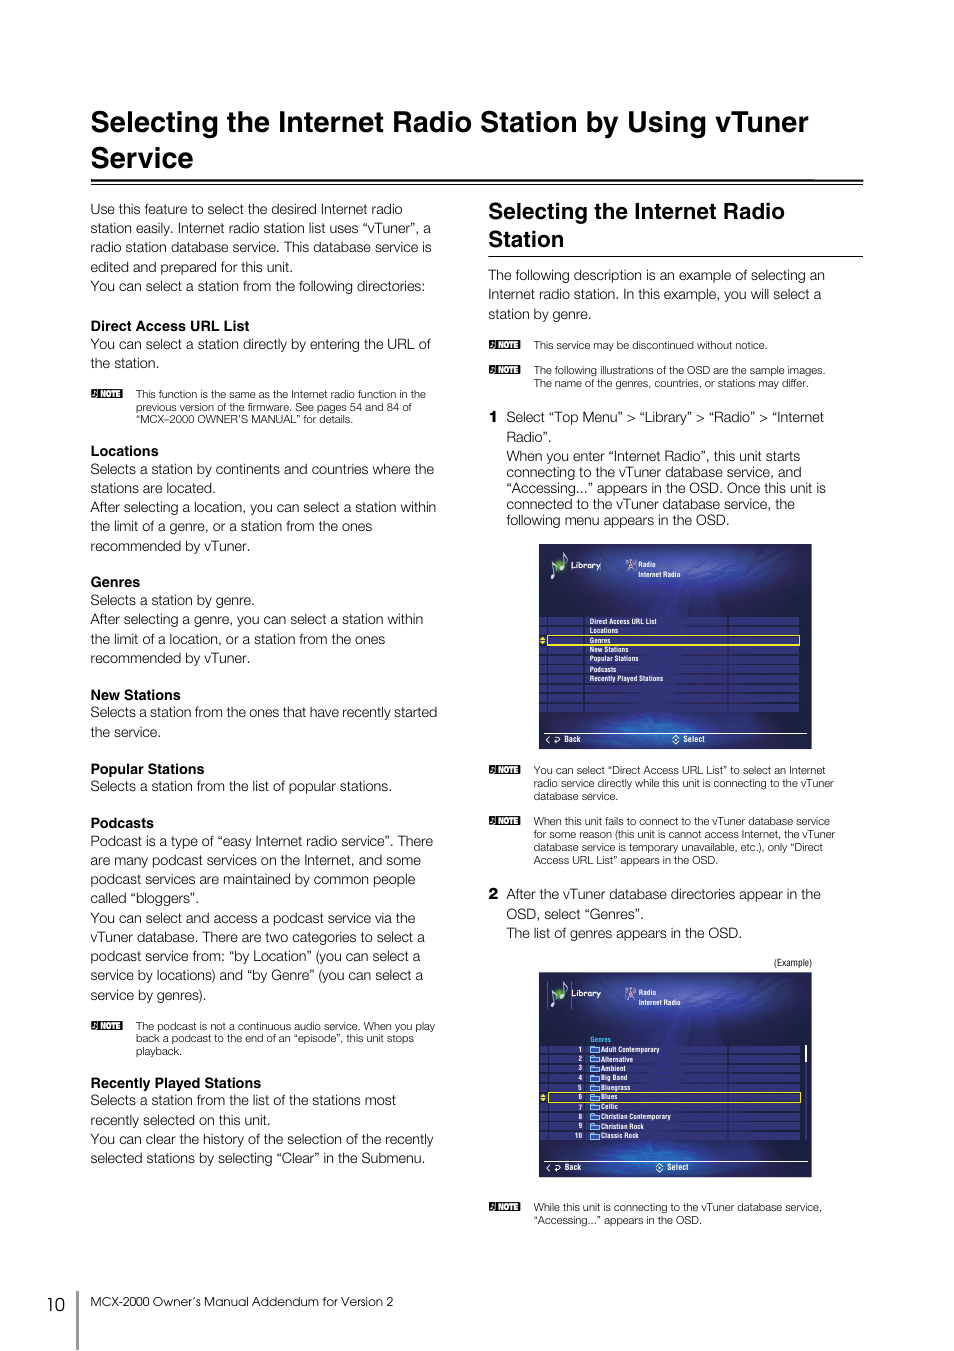 Selecting the internet radio station, By using vtuner service | Yamaha  MCX-2000 User Manual | Page 10 / 25